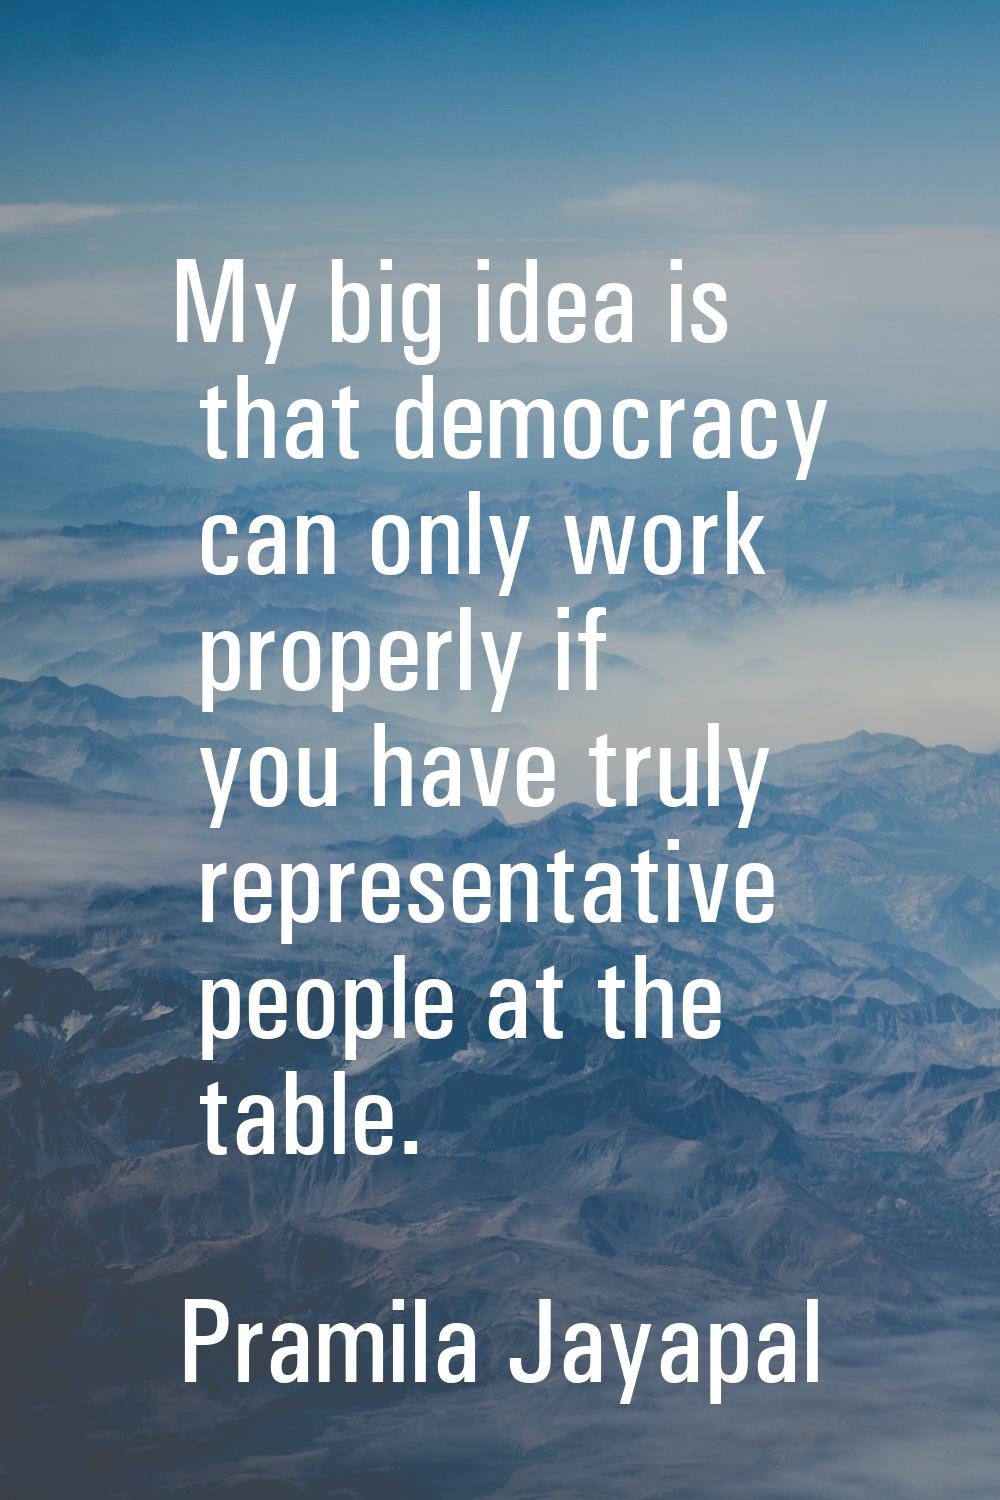 My big idea is that democracy can only work properly if you have truly representative people at the